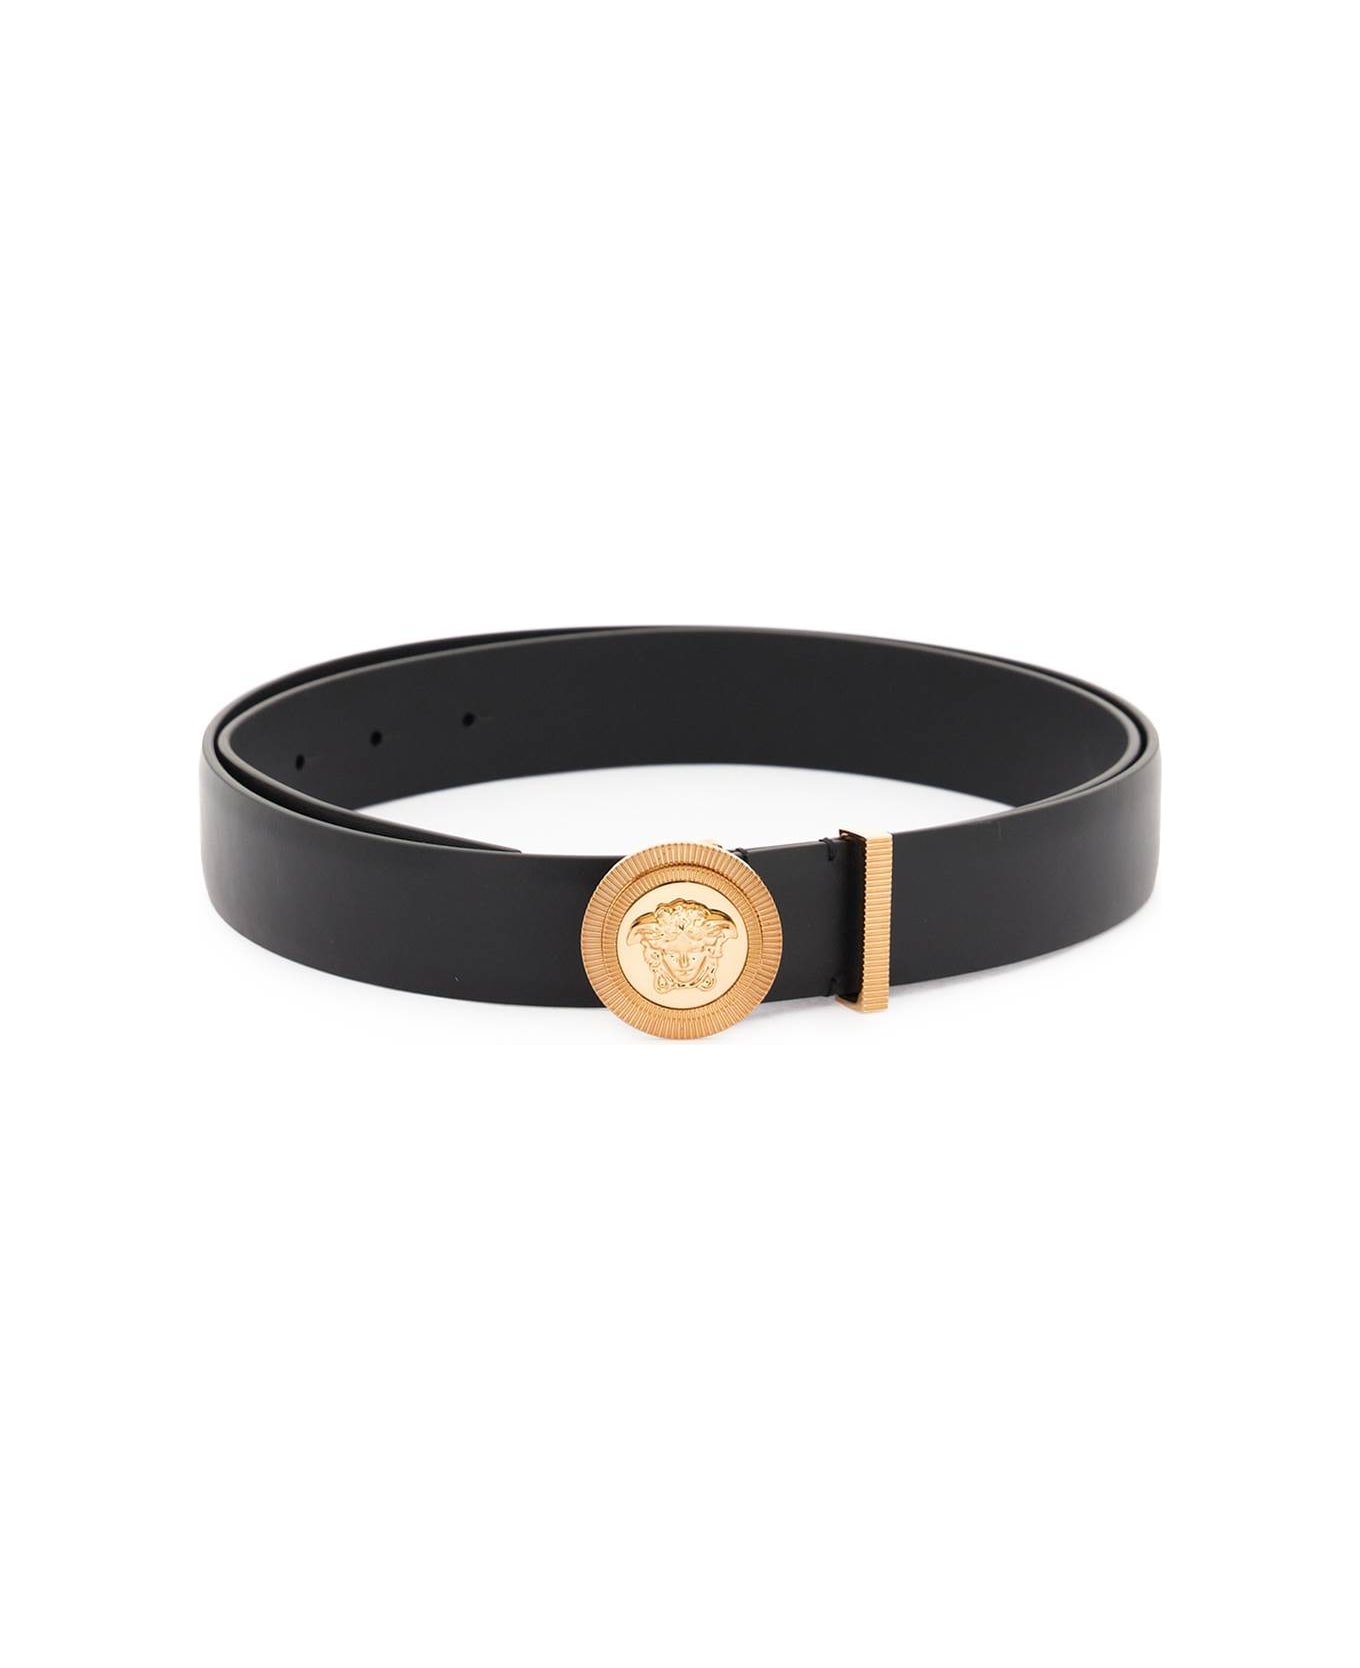 Versace Medusa Biggie Leather Belt - We partner with Italys best luxury retailers and work together with them to provide you Versace